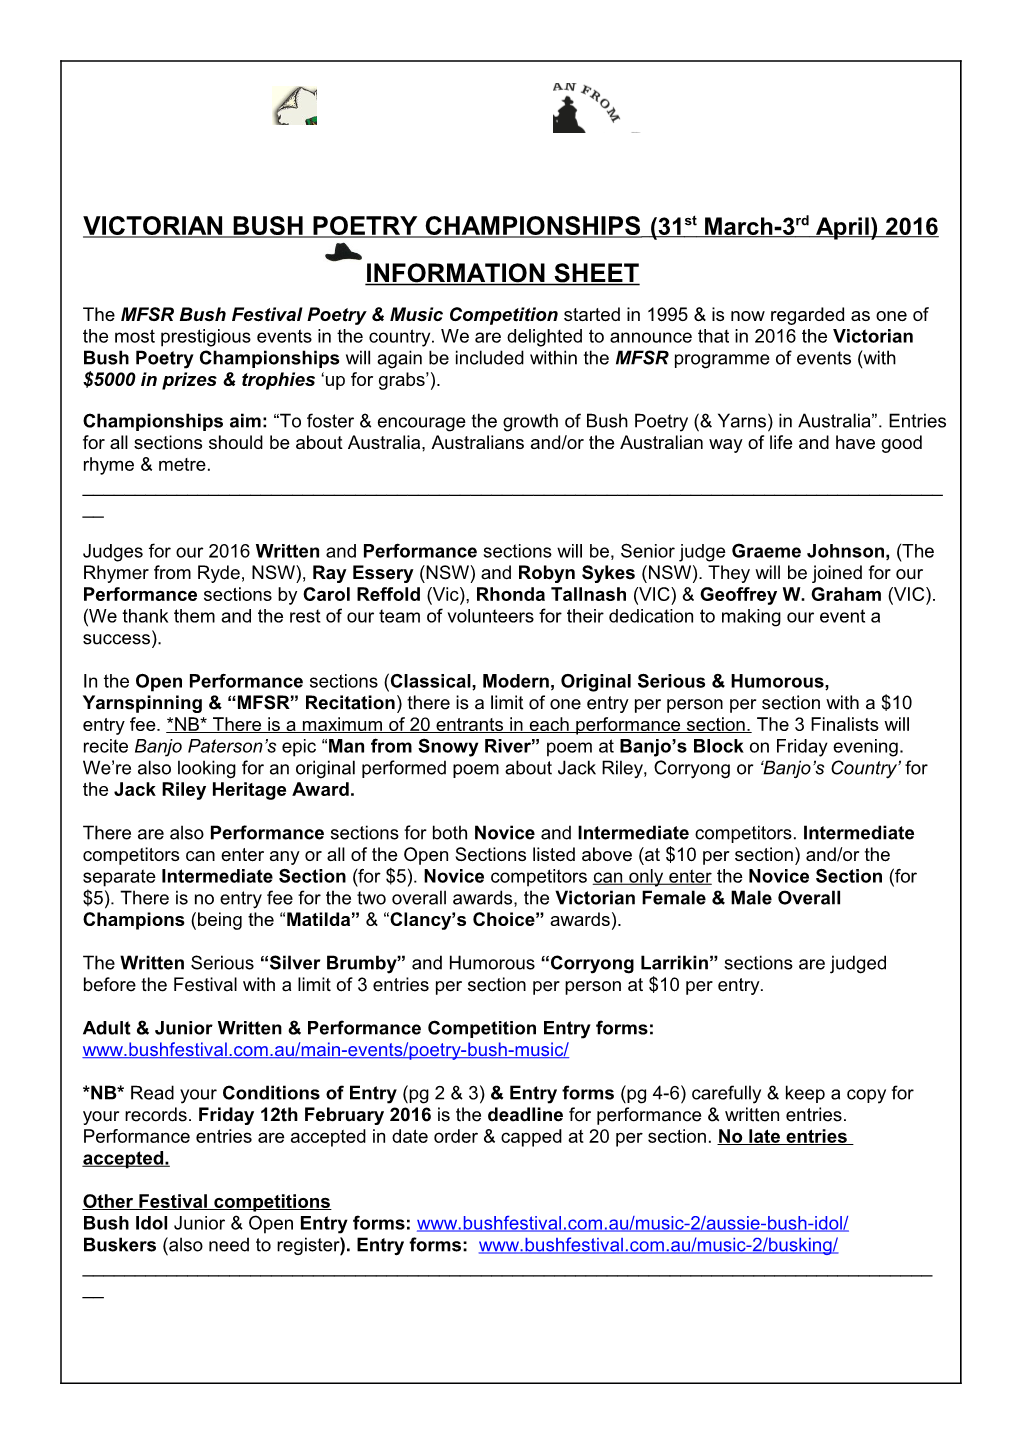 VICTORIAN BUSH POETRY CHAMPIONSHIPS (31St March-3Rd April) 2016